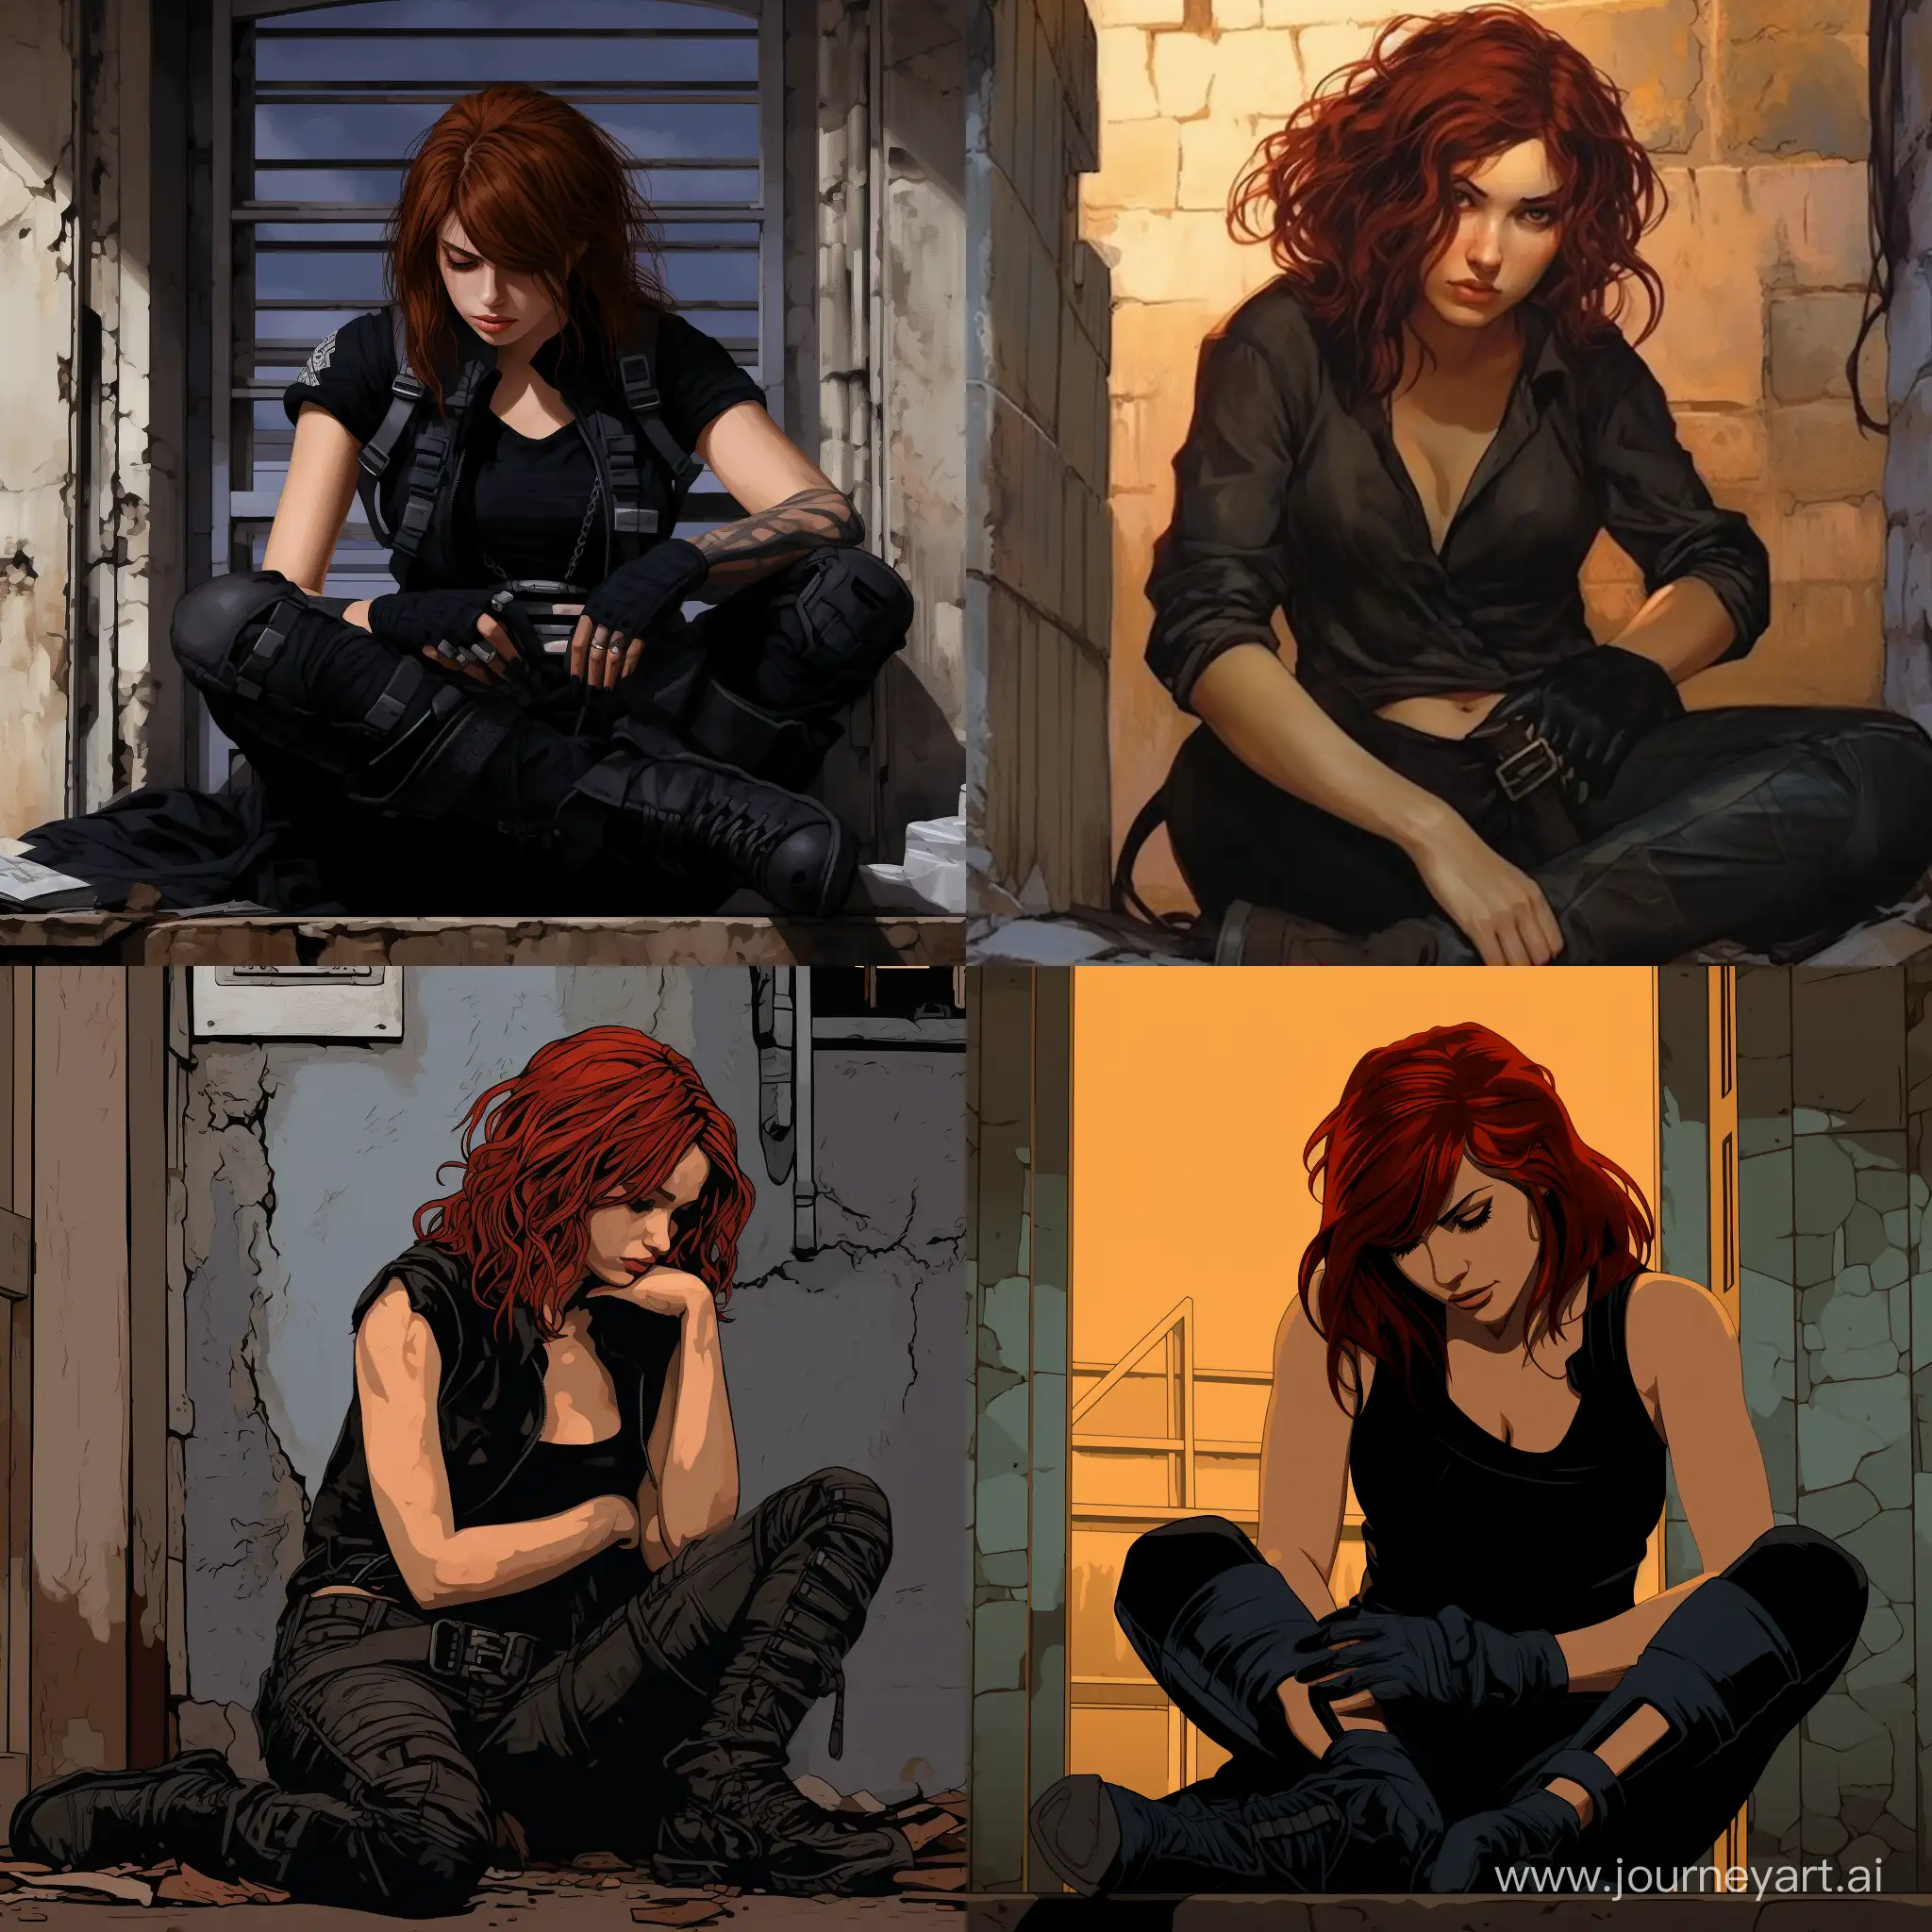 Natasha Romanoff sitting against a wall, clutching her stomach, with a hole in her stomach